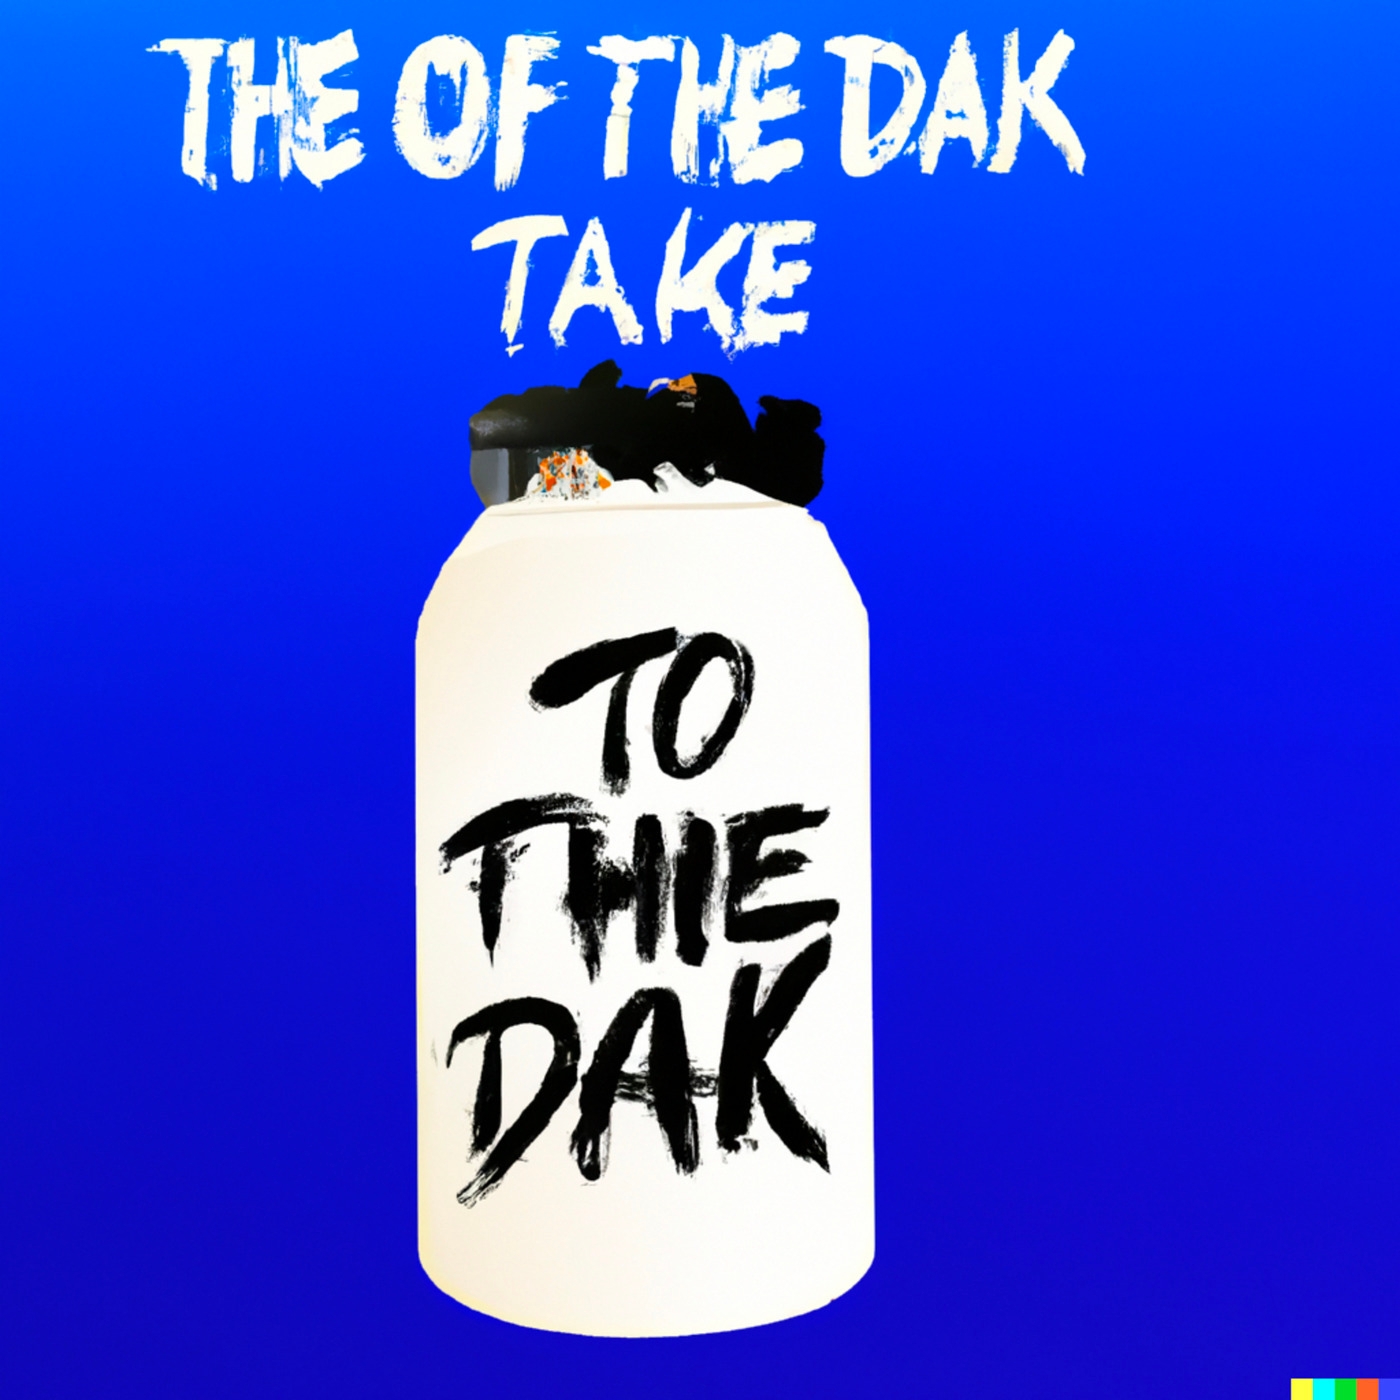 An AI-generated image with the text, "THE OF THE DAK TAKE TO THIE DAK"